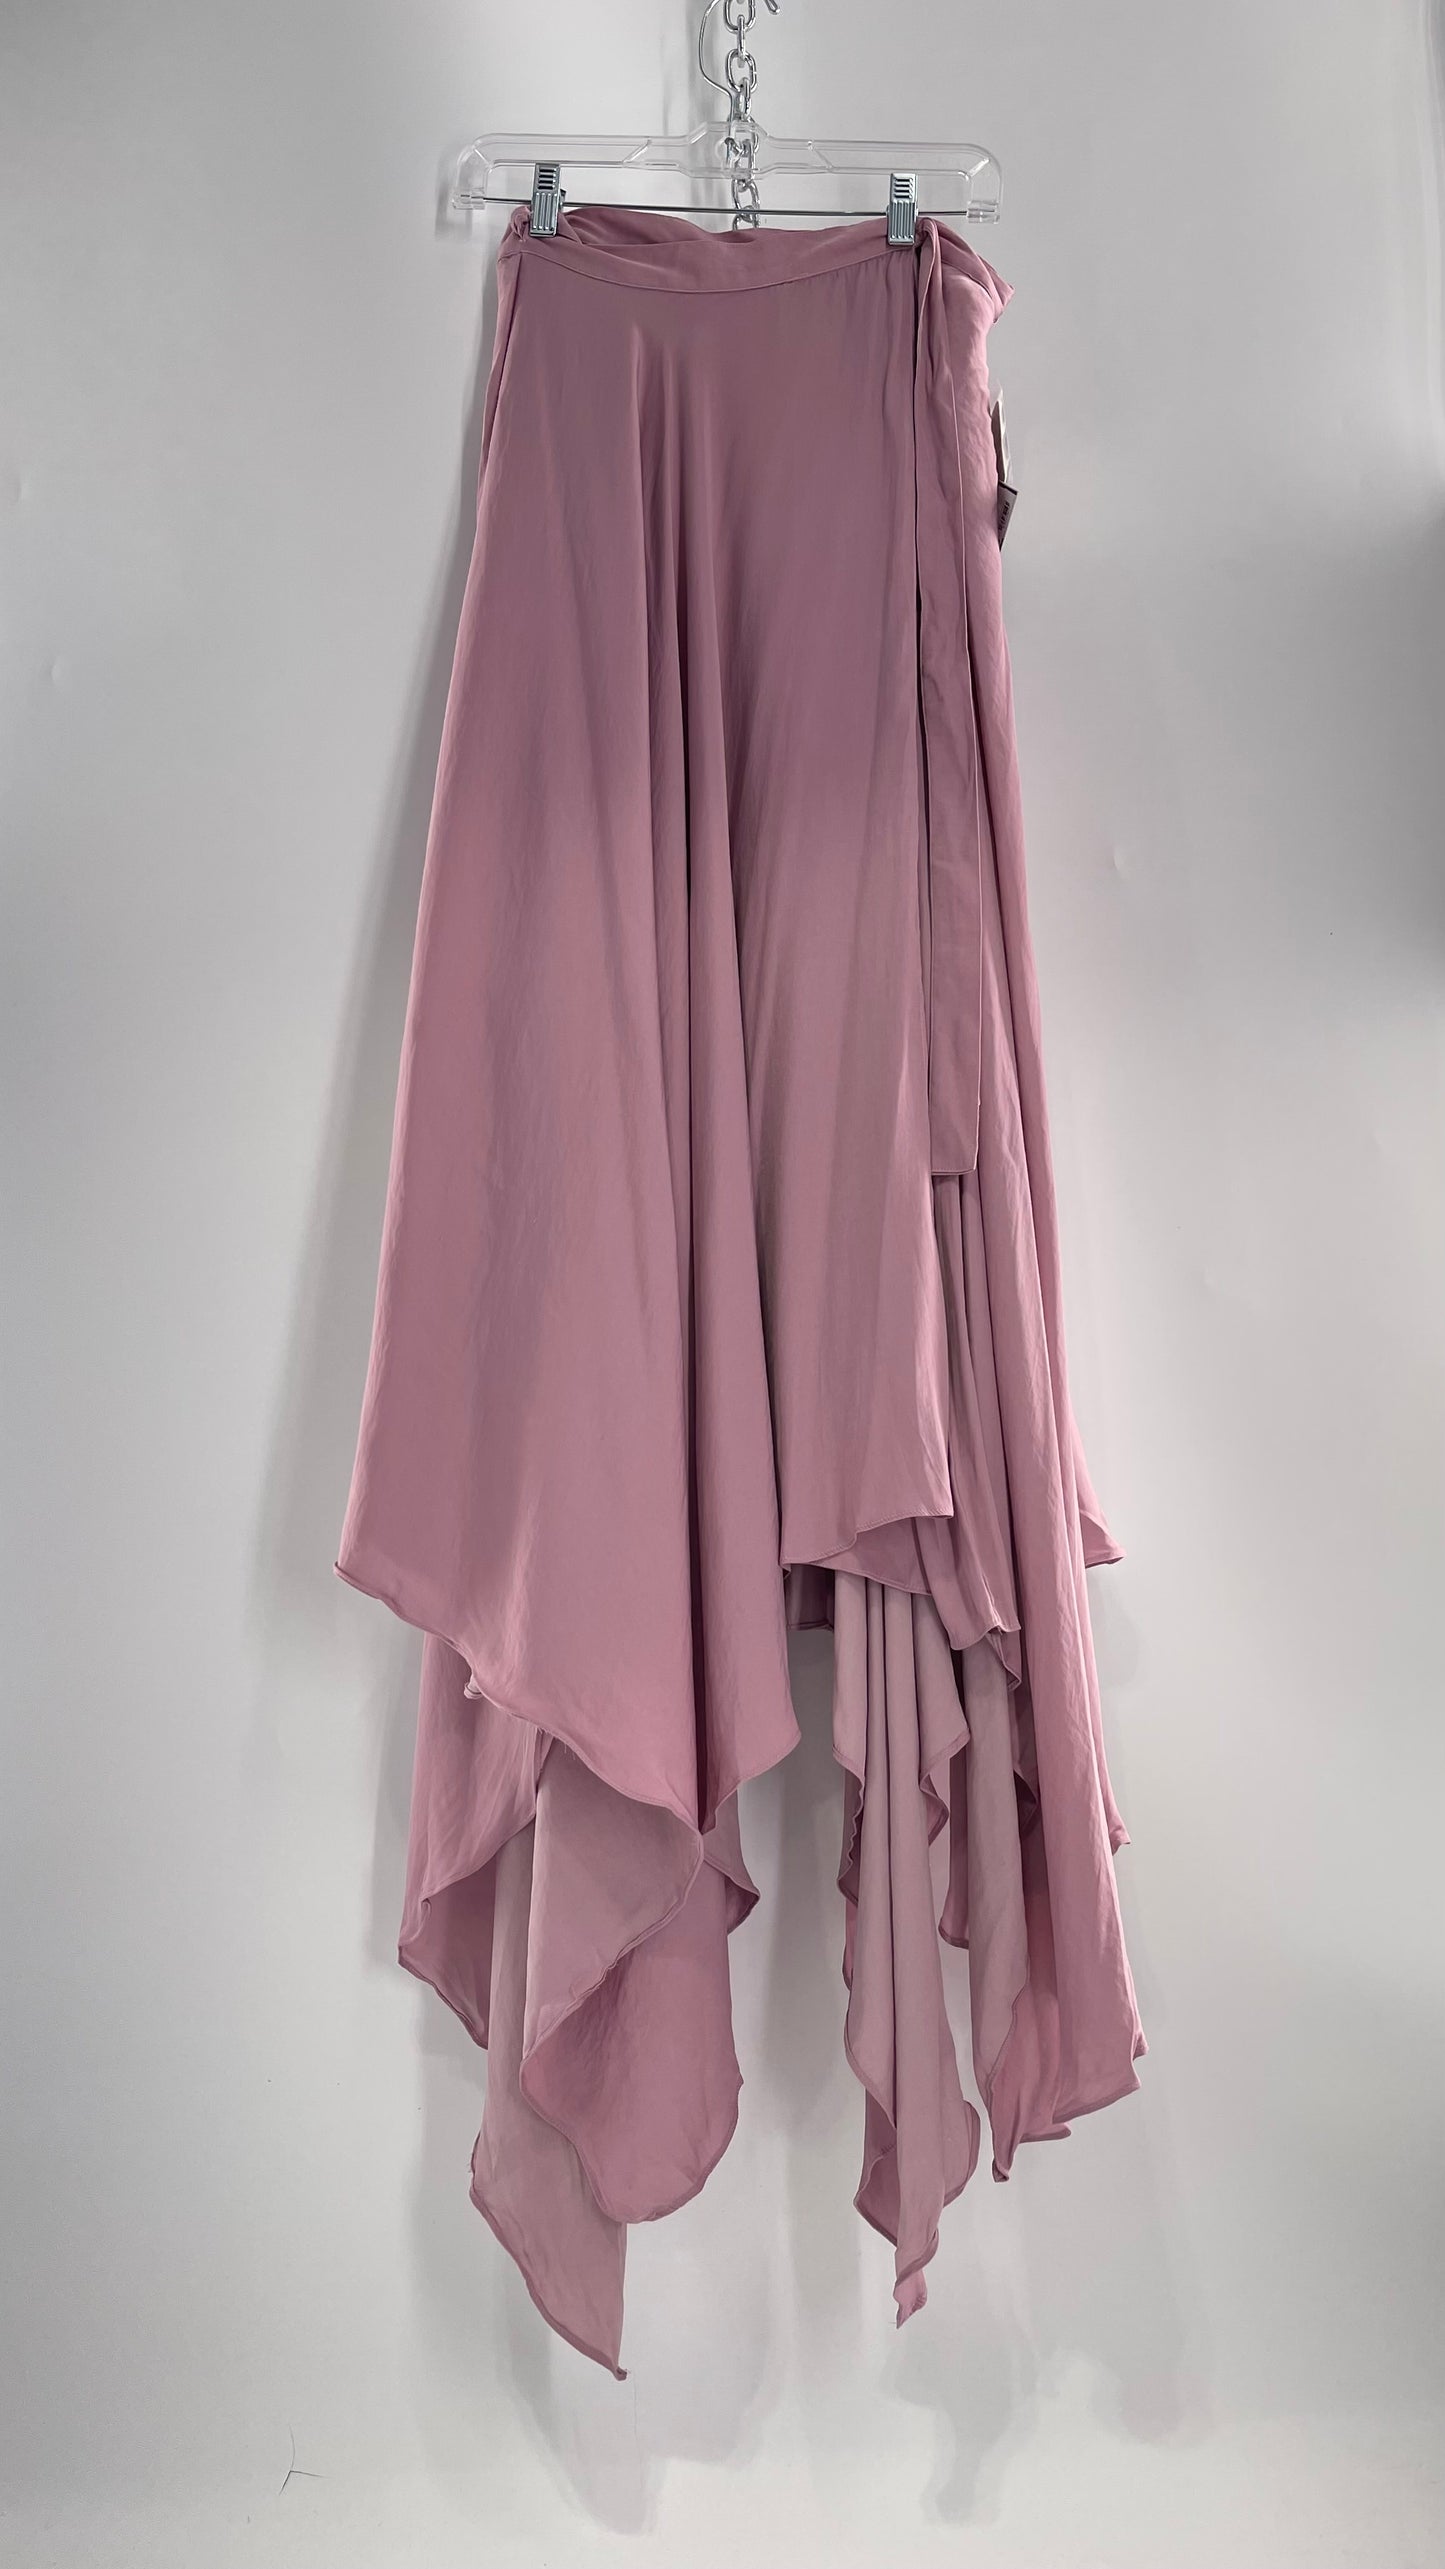 Free People Lavender Handkerchief Hem Skirt with Tags Attached (Medium)